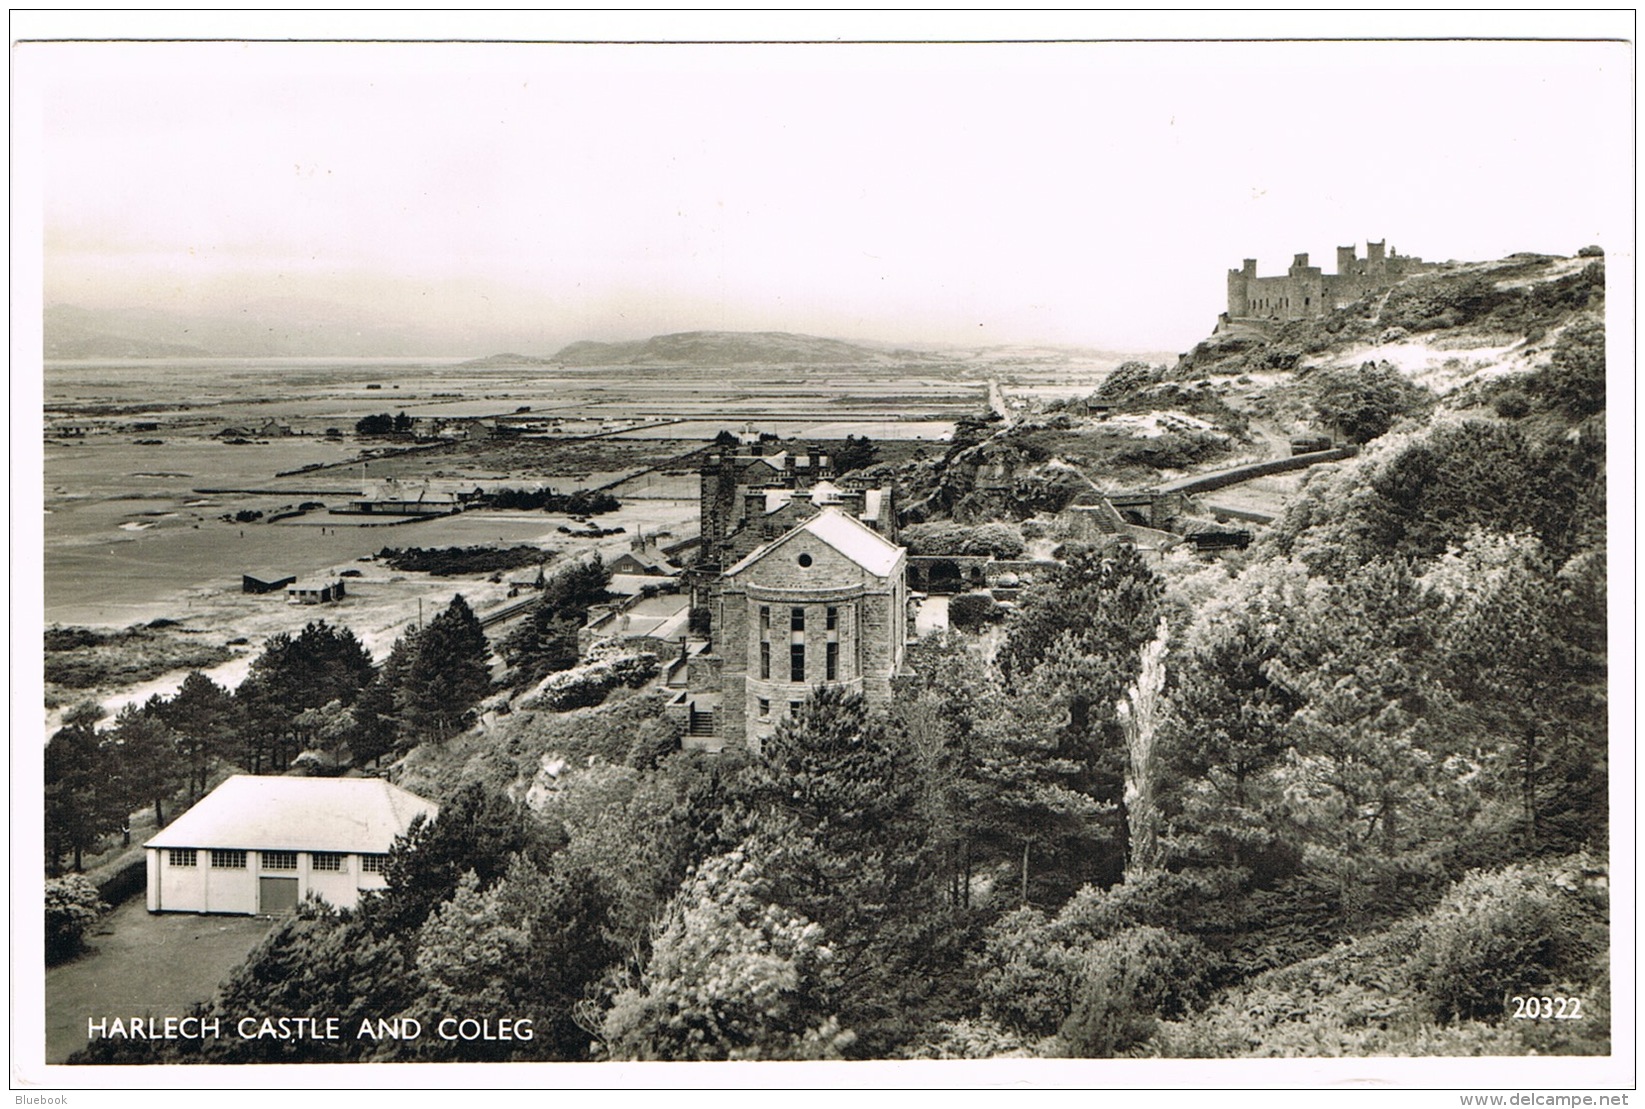 RB 1115 -  1958  J. Salmon Real Photo Postcard - Harlech Castle &amp; College - Merionethshire Wales - Merionethshire